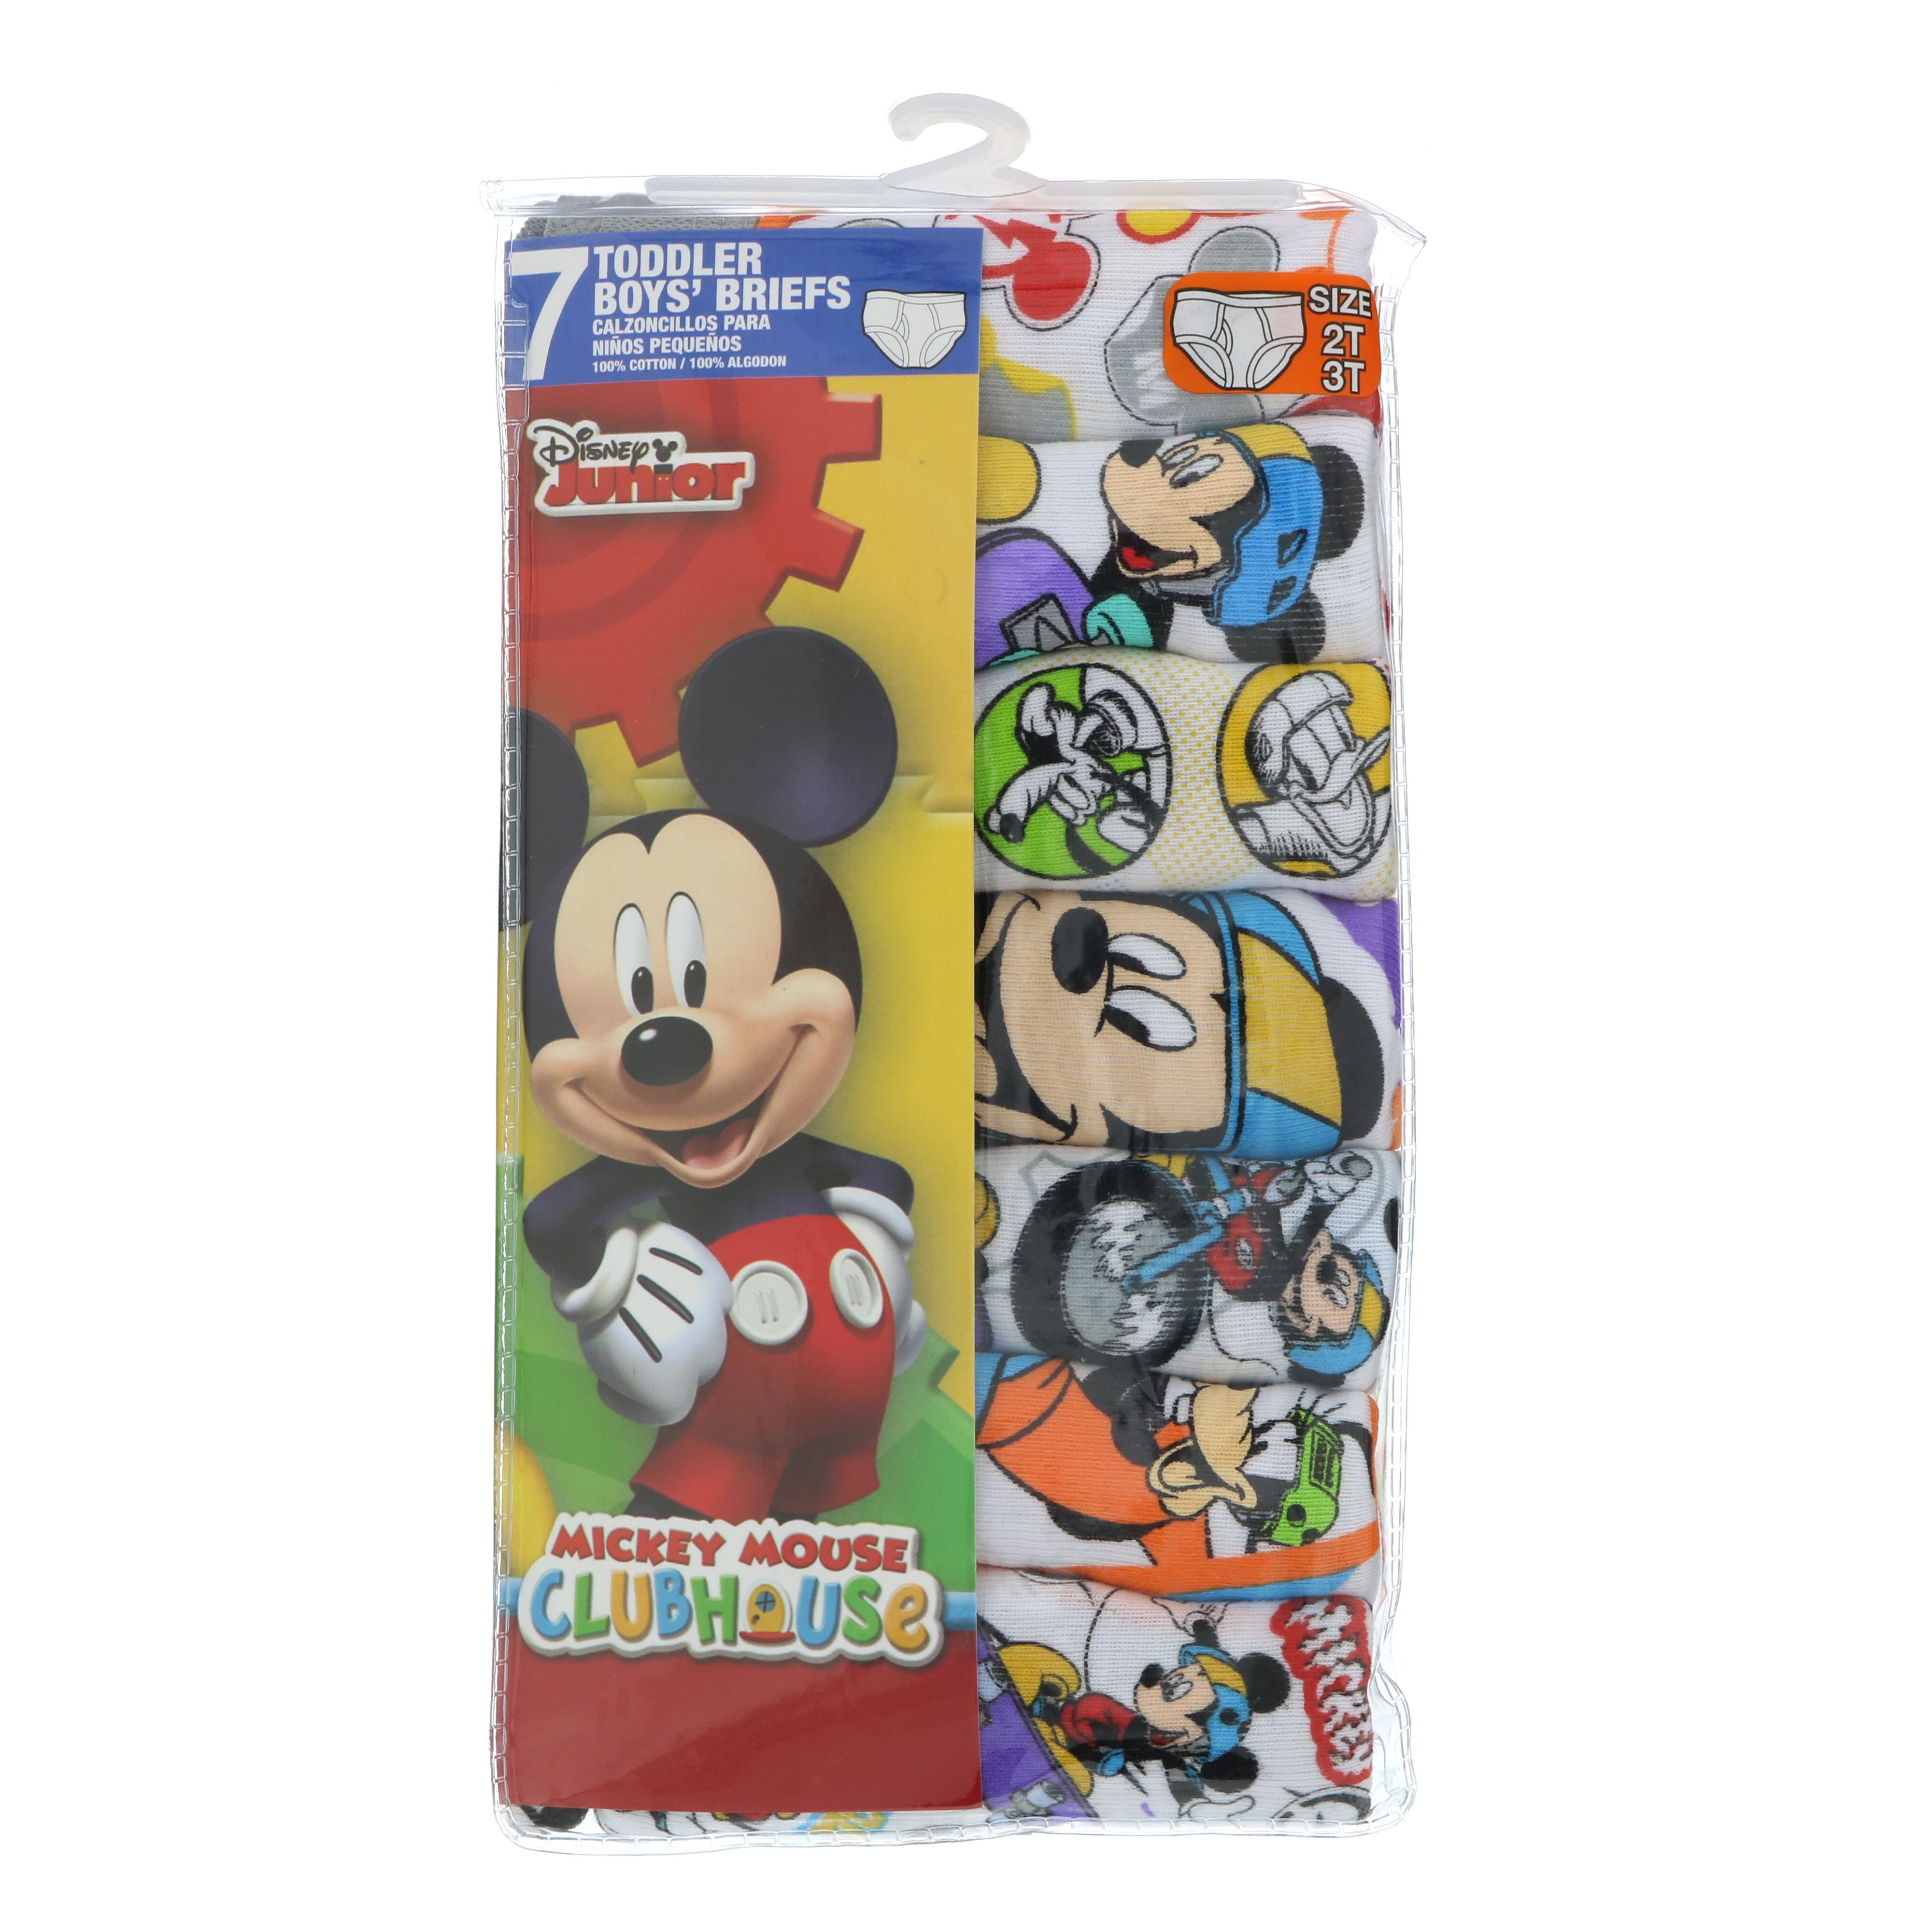 DISNEY MICKEY MOUSE CLUBHOUSE TODDLER BOYS BRIEF SIZE 4T (3 PACKS / 9  PAIRS)